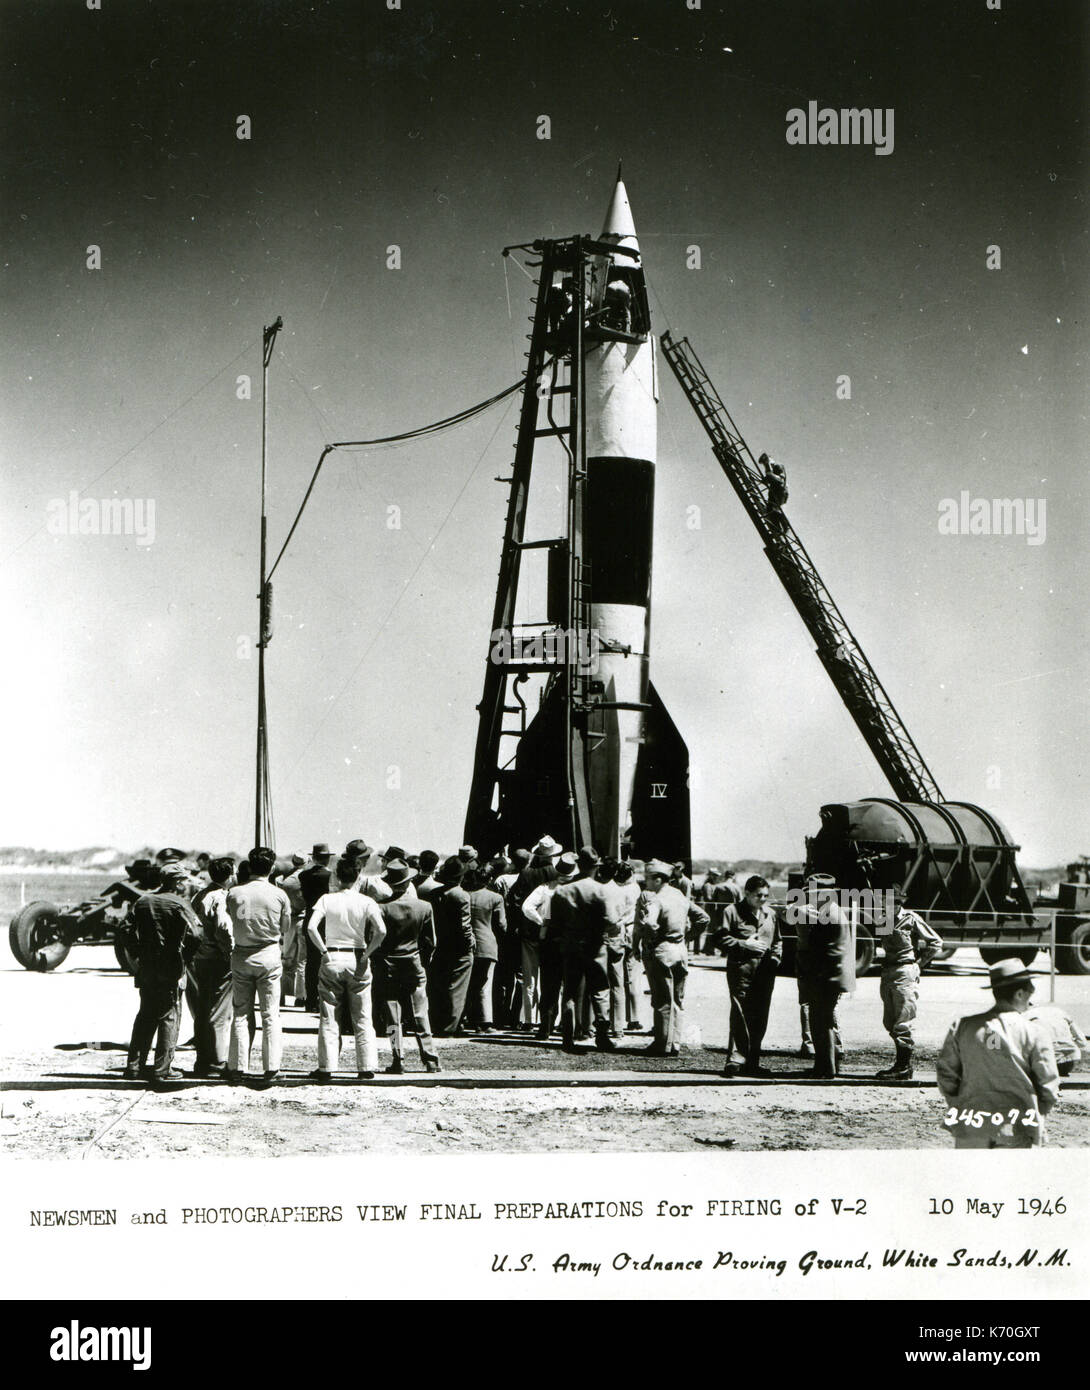 Newsmen and photographers view the final preparations for the firing of the V-2 rocket from the U.S. Army Ordnance Proving Ground, White Sands, NM,  May 10, 1946 Stock Photo